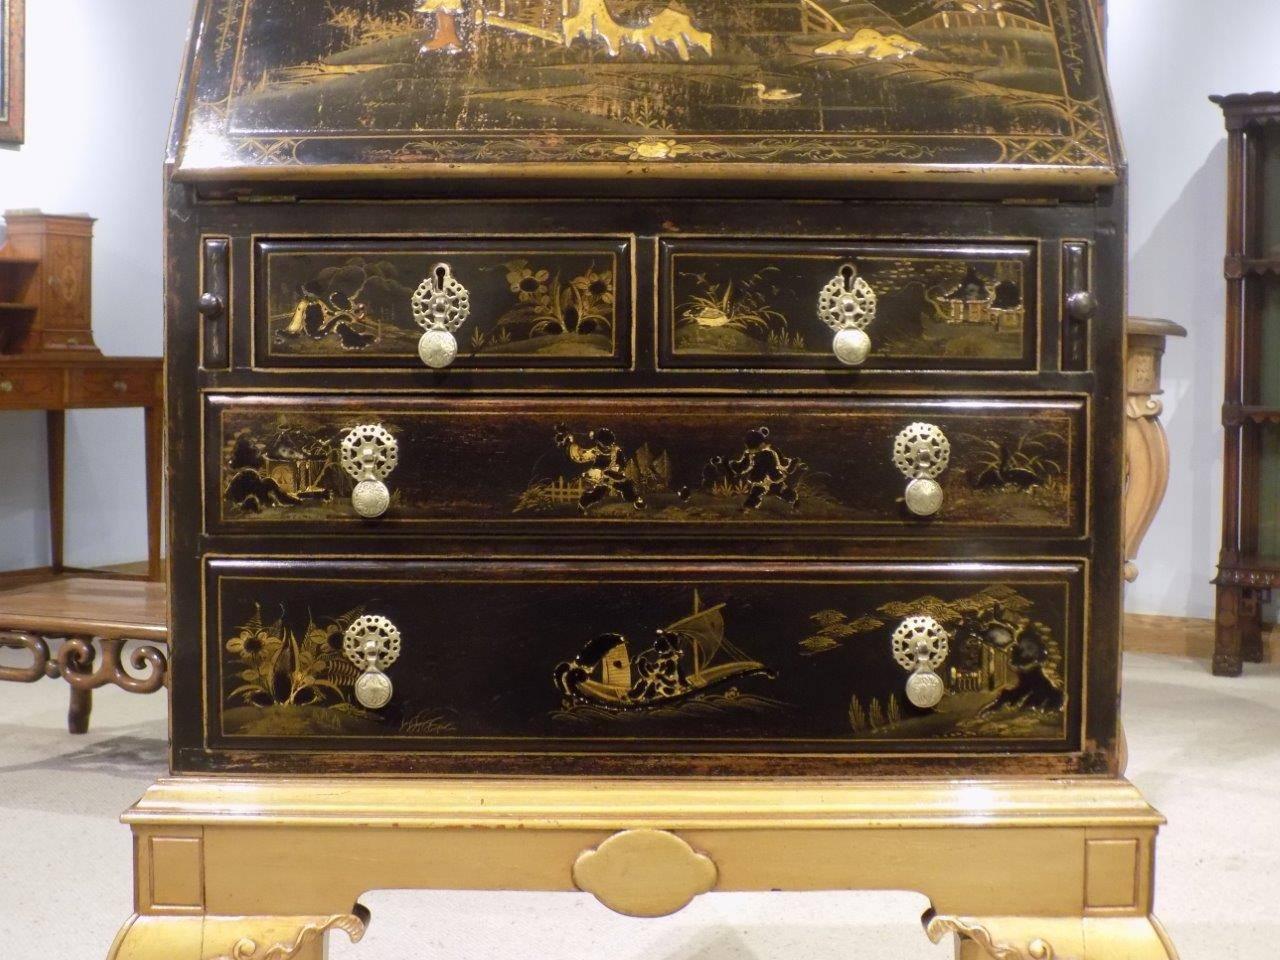 A chinoiserie lacquered Edwardian period bureau on stand. The bureau section having fine raised lacquered detail depicting Oriental every day life to the fall front, sides and drawer fronts. The bureau opening to reveal pigeon holes, shelves and a